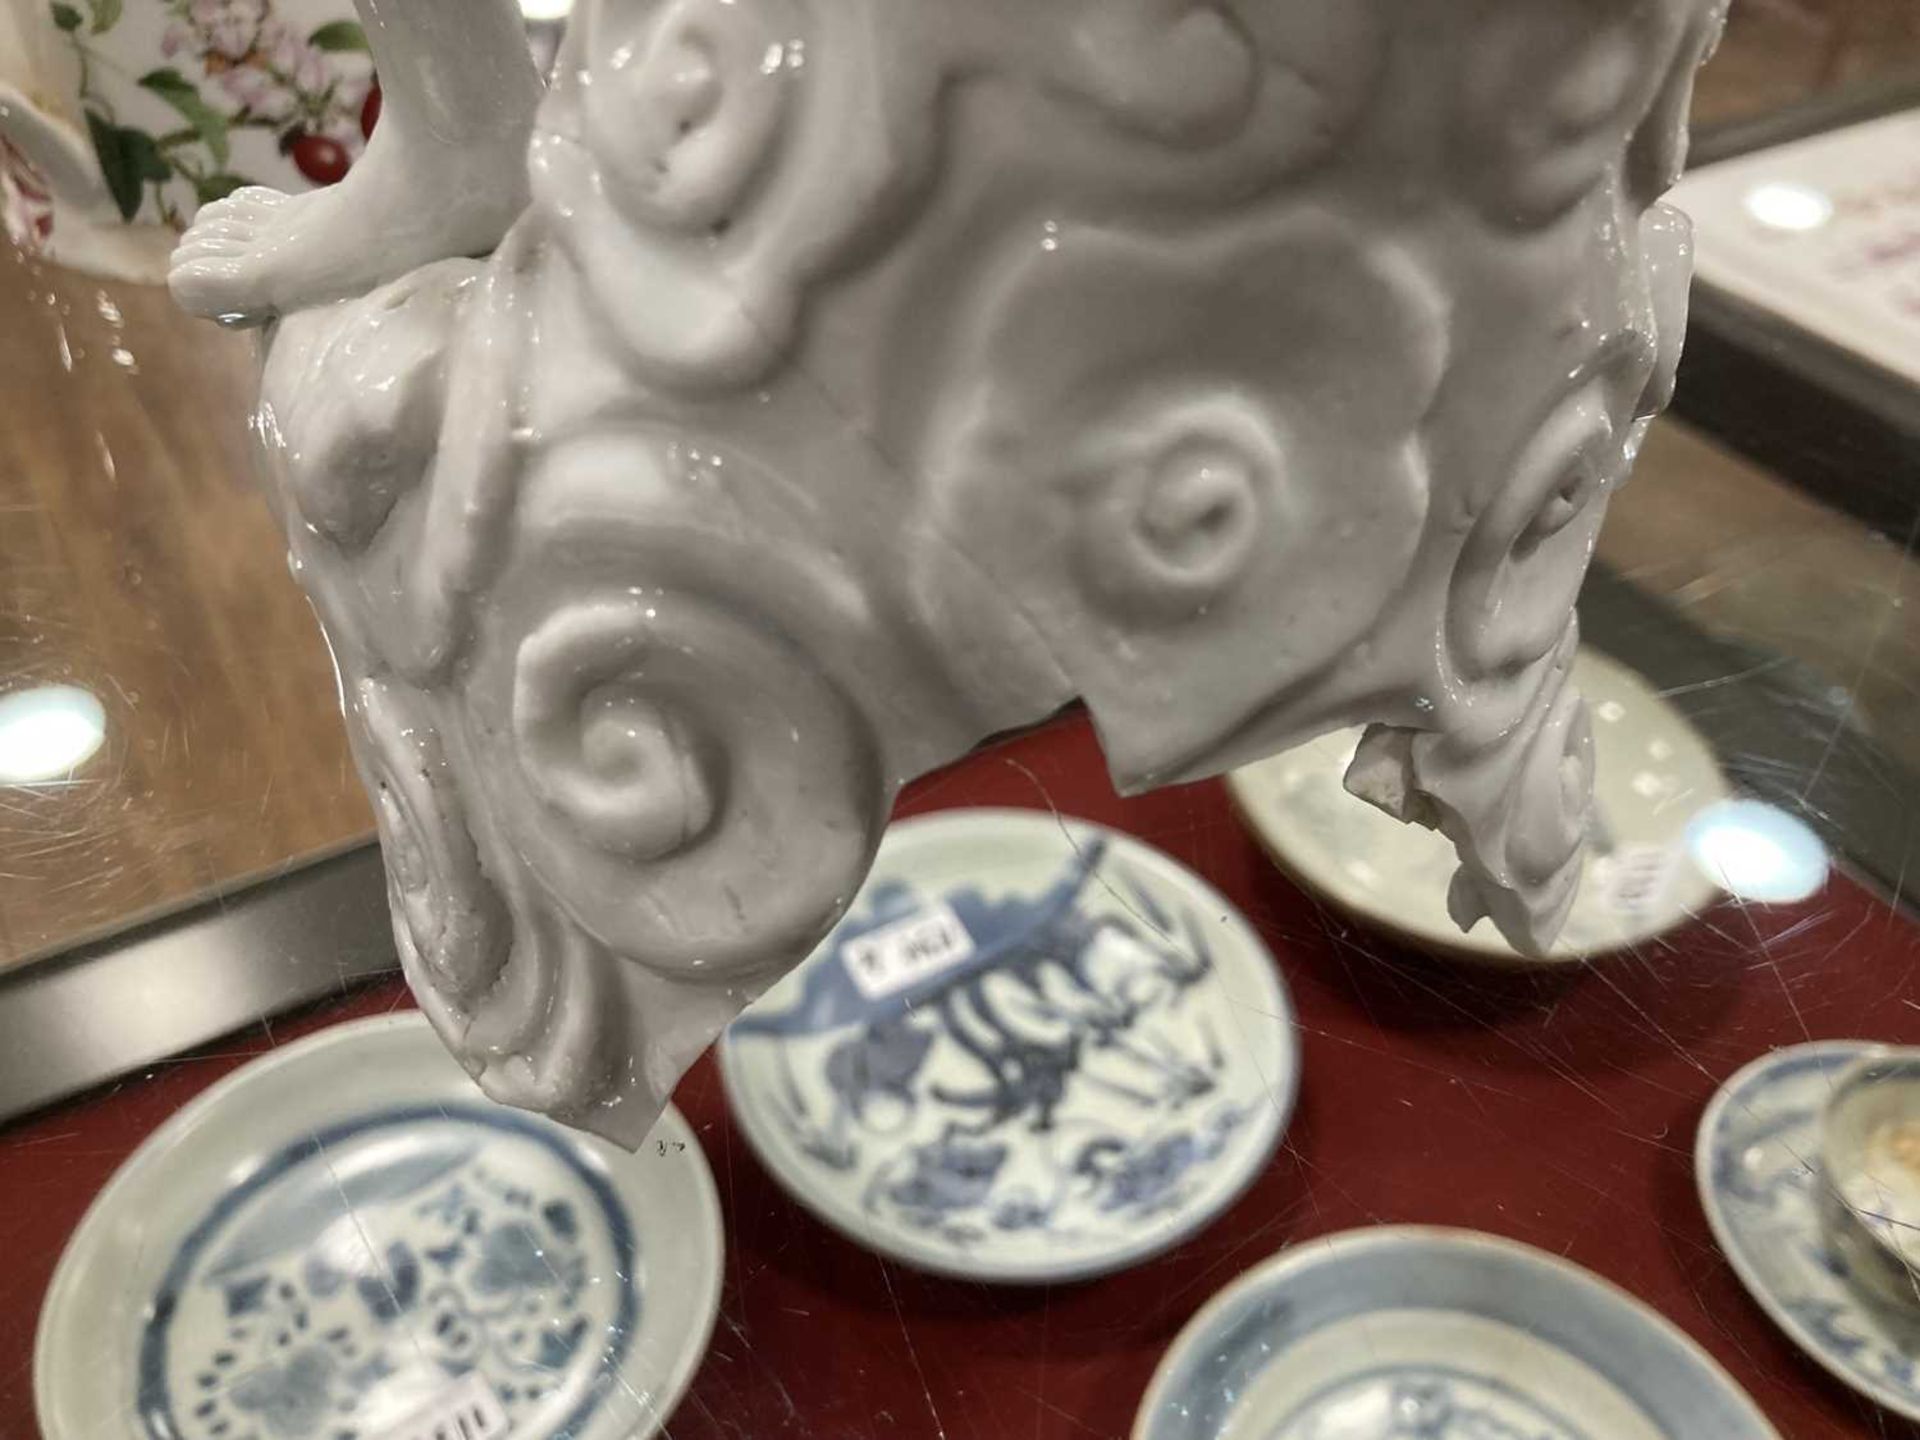 A Chinese blanc de chine figure, possibly Dong Fangshuo, holding a walking stick on a swirl design - Bild 4 aus 22